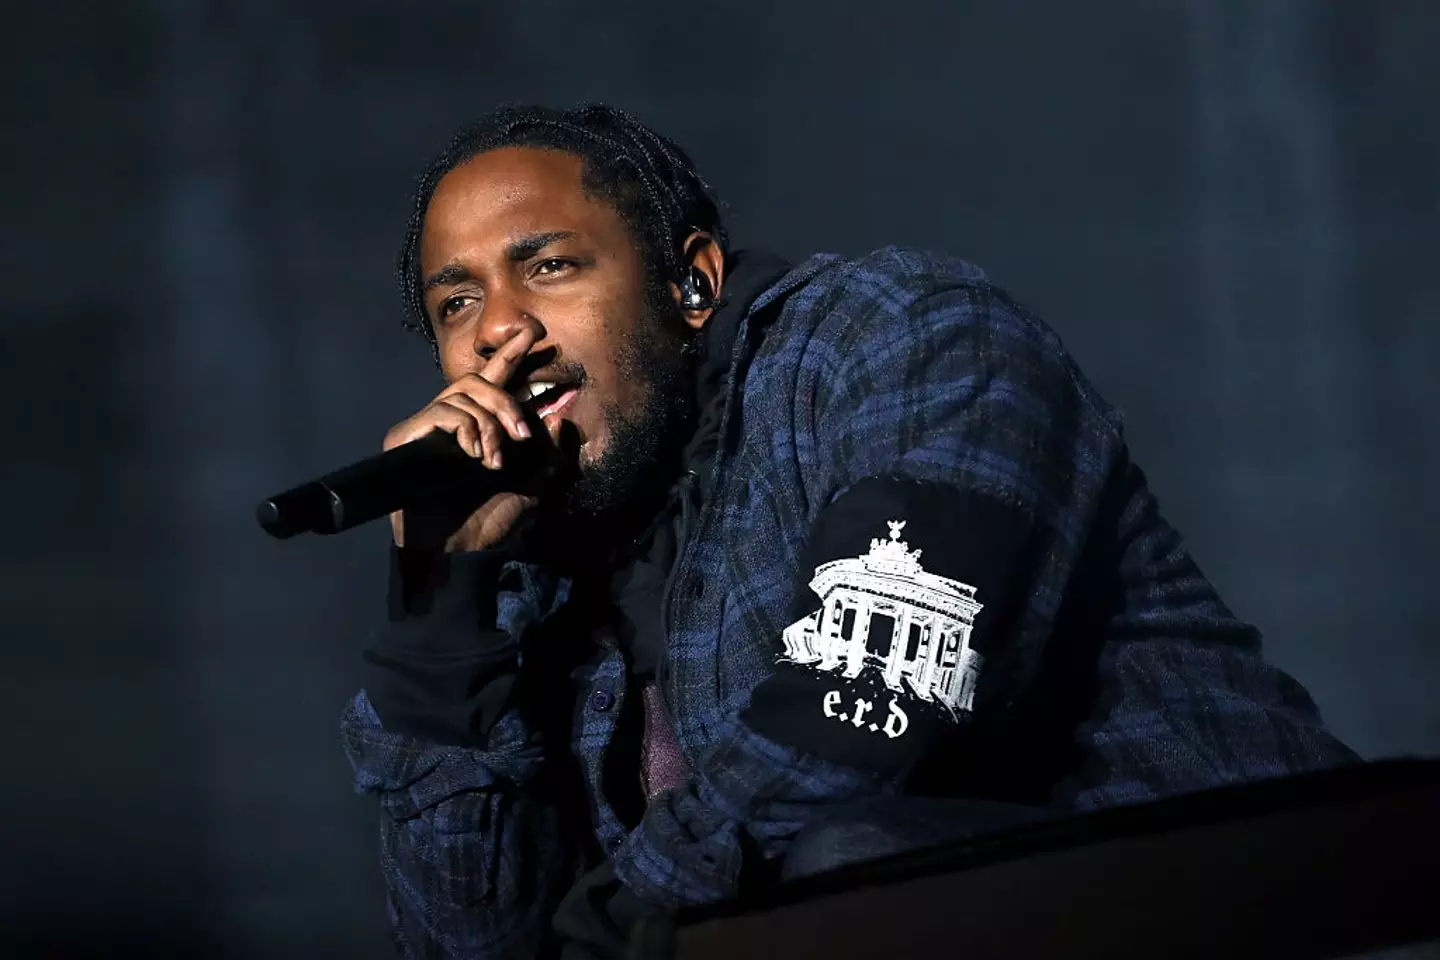 Kendrick Lamar's latest lyrics appear to have confused two people and fans think it's hilarious. (Rick Kern/Getty Images for Samsung)